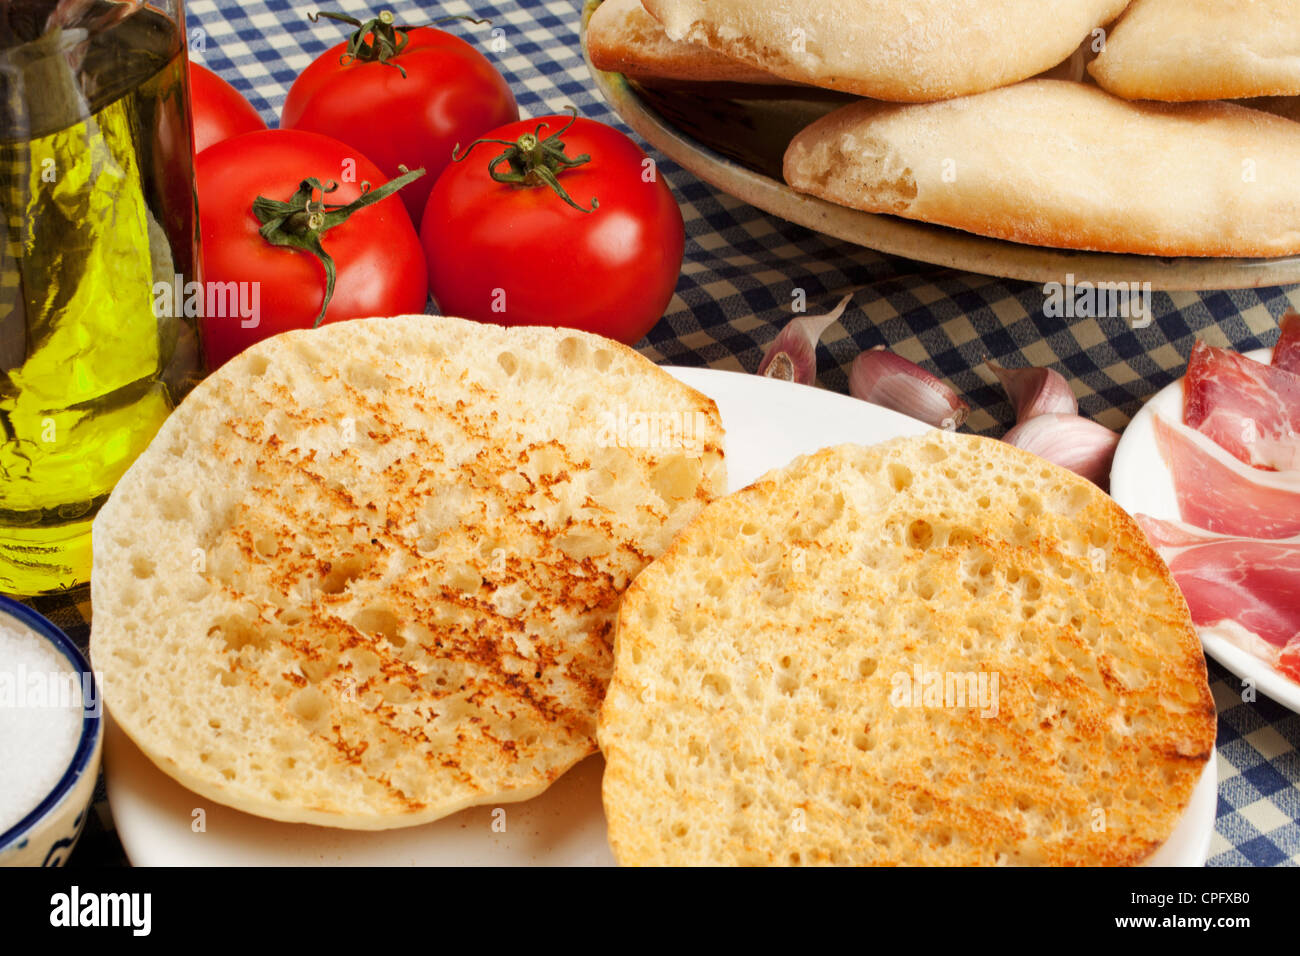 Typical breakfast mollete with ham tomato and oil Antequera Malaga Andalusia Spain Stock Photo